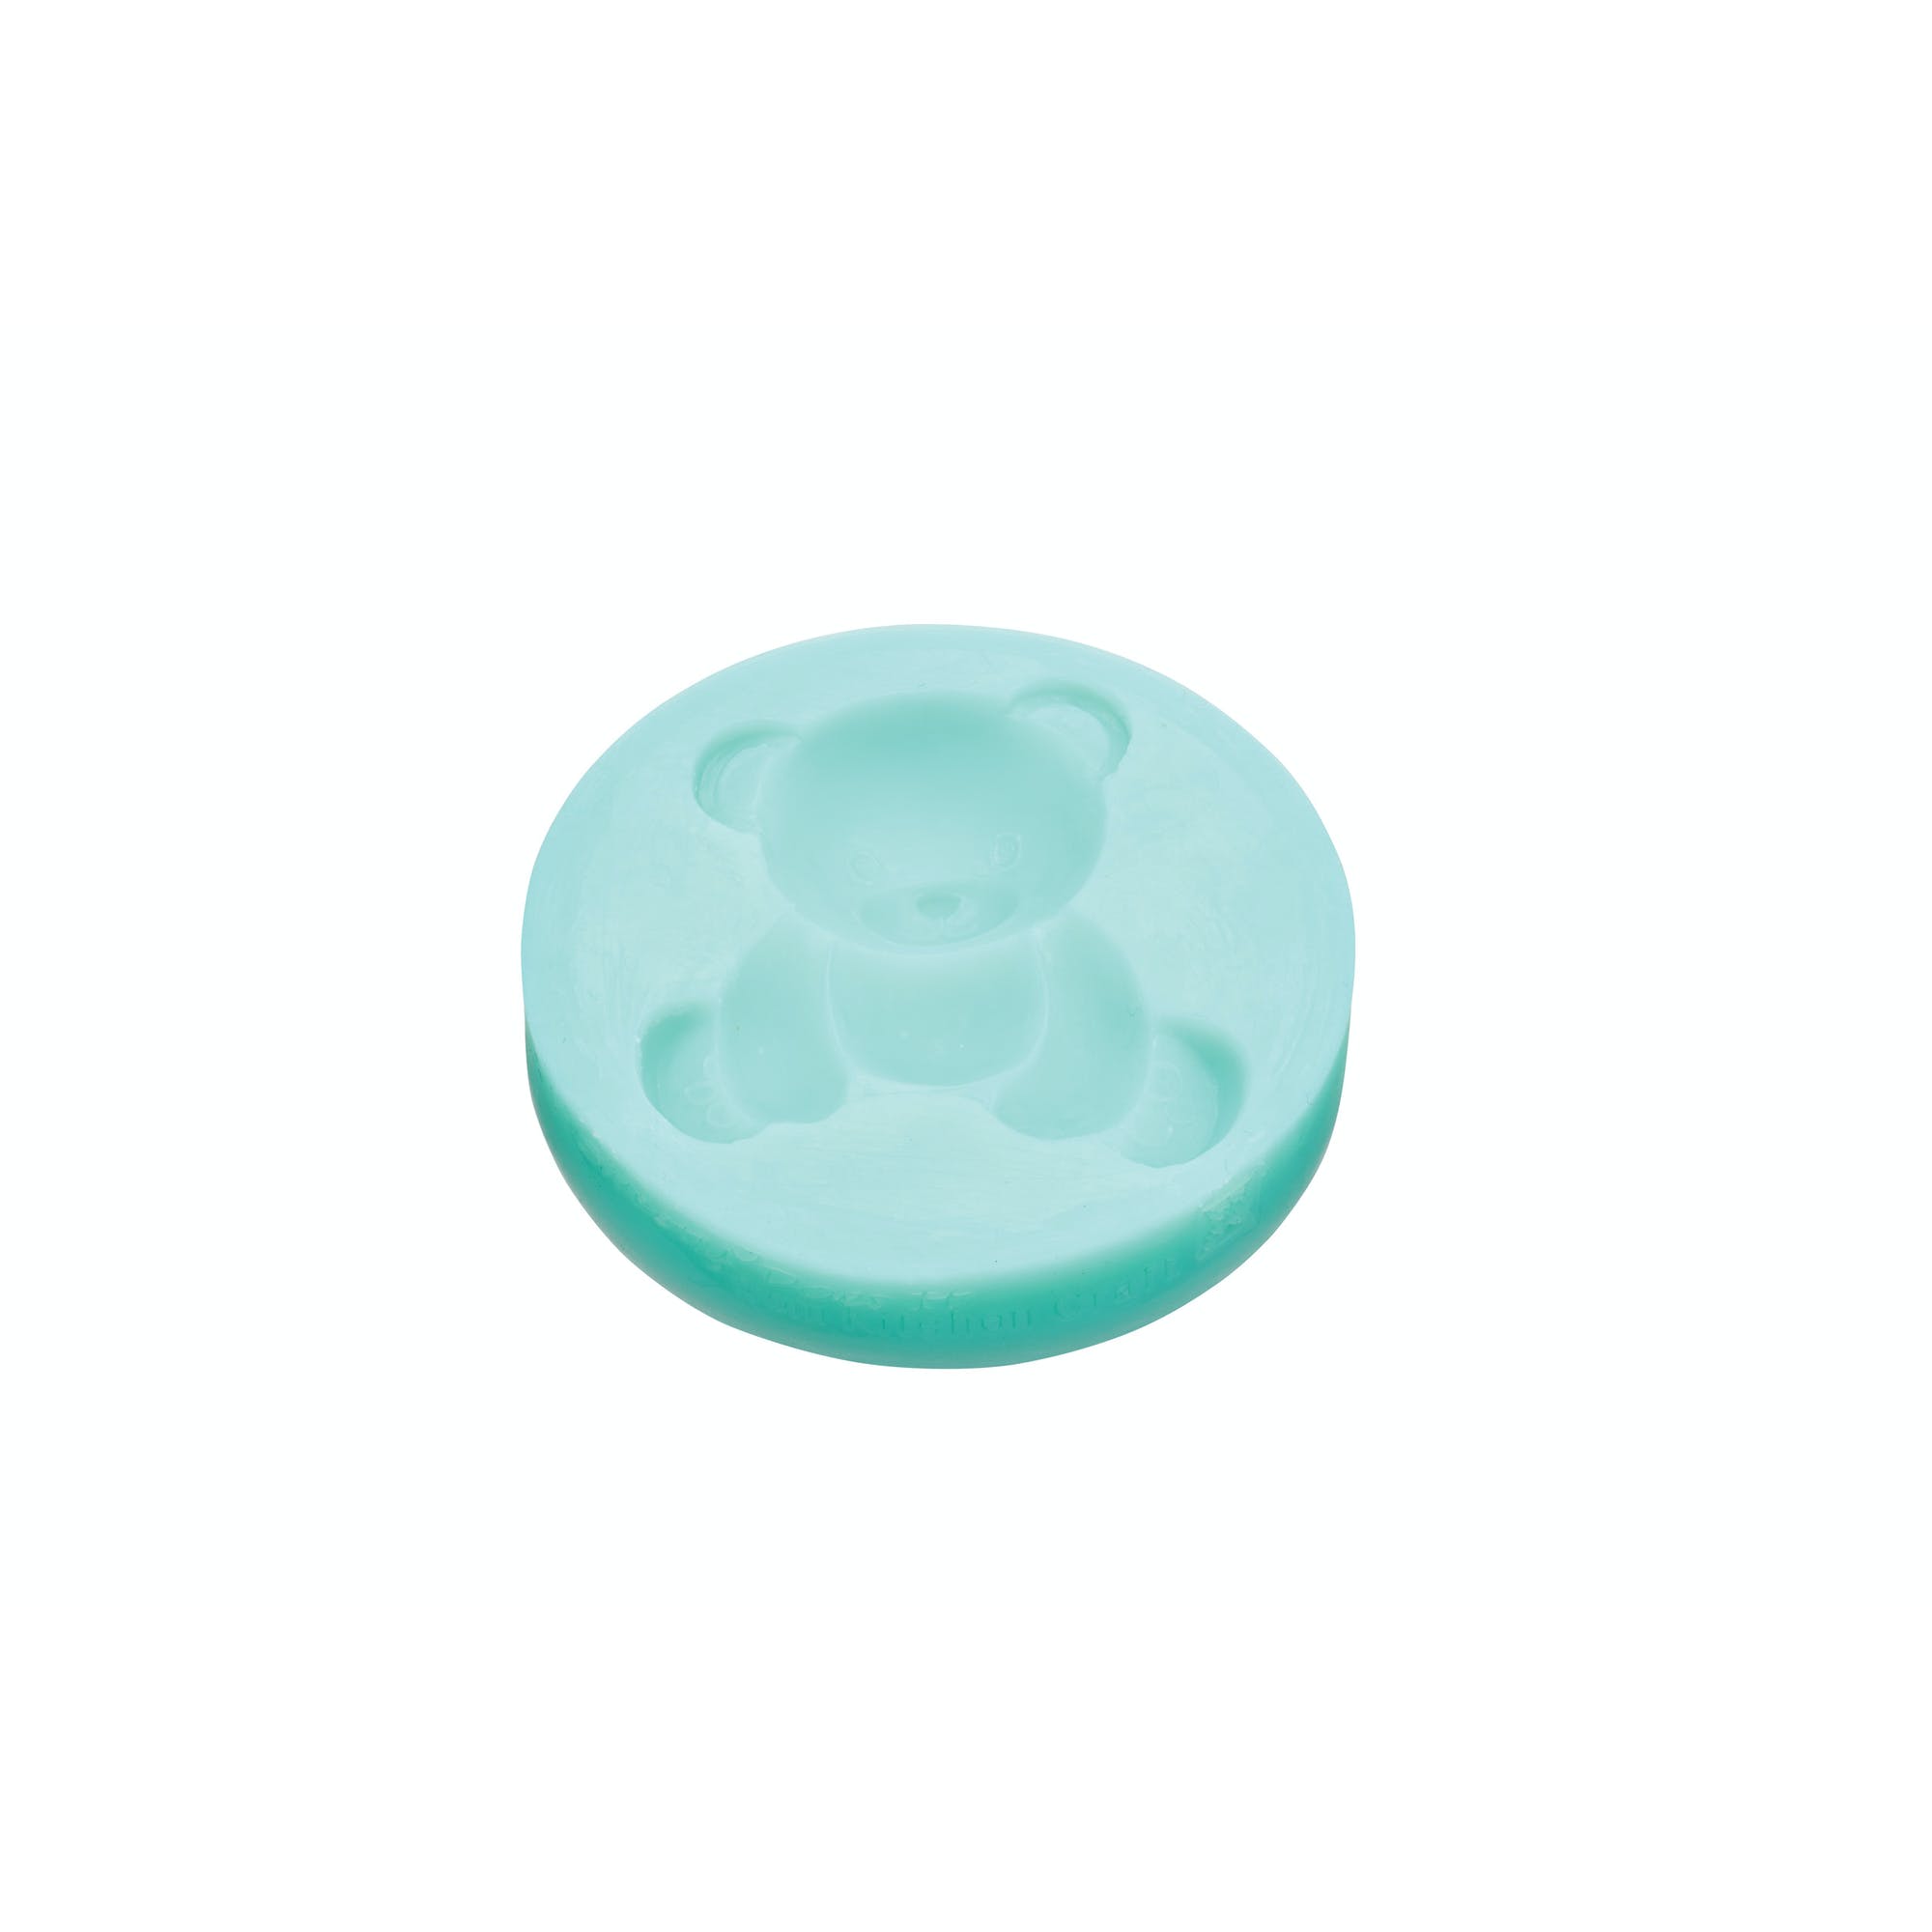 Sweetly Does It Teddy Bear Silicone Fondant Sugarcraft Mould - The Cooks Cupboard Ltd